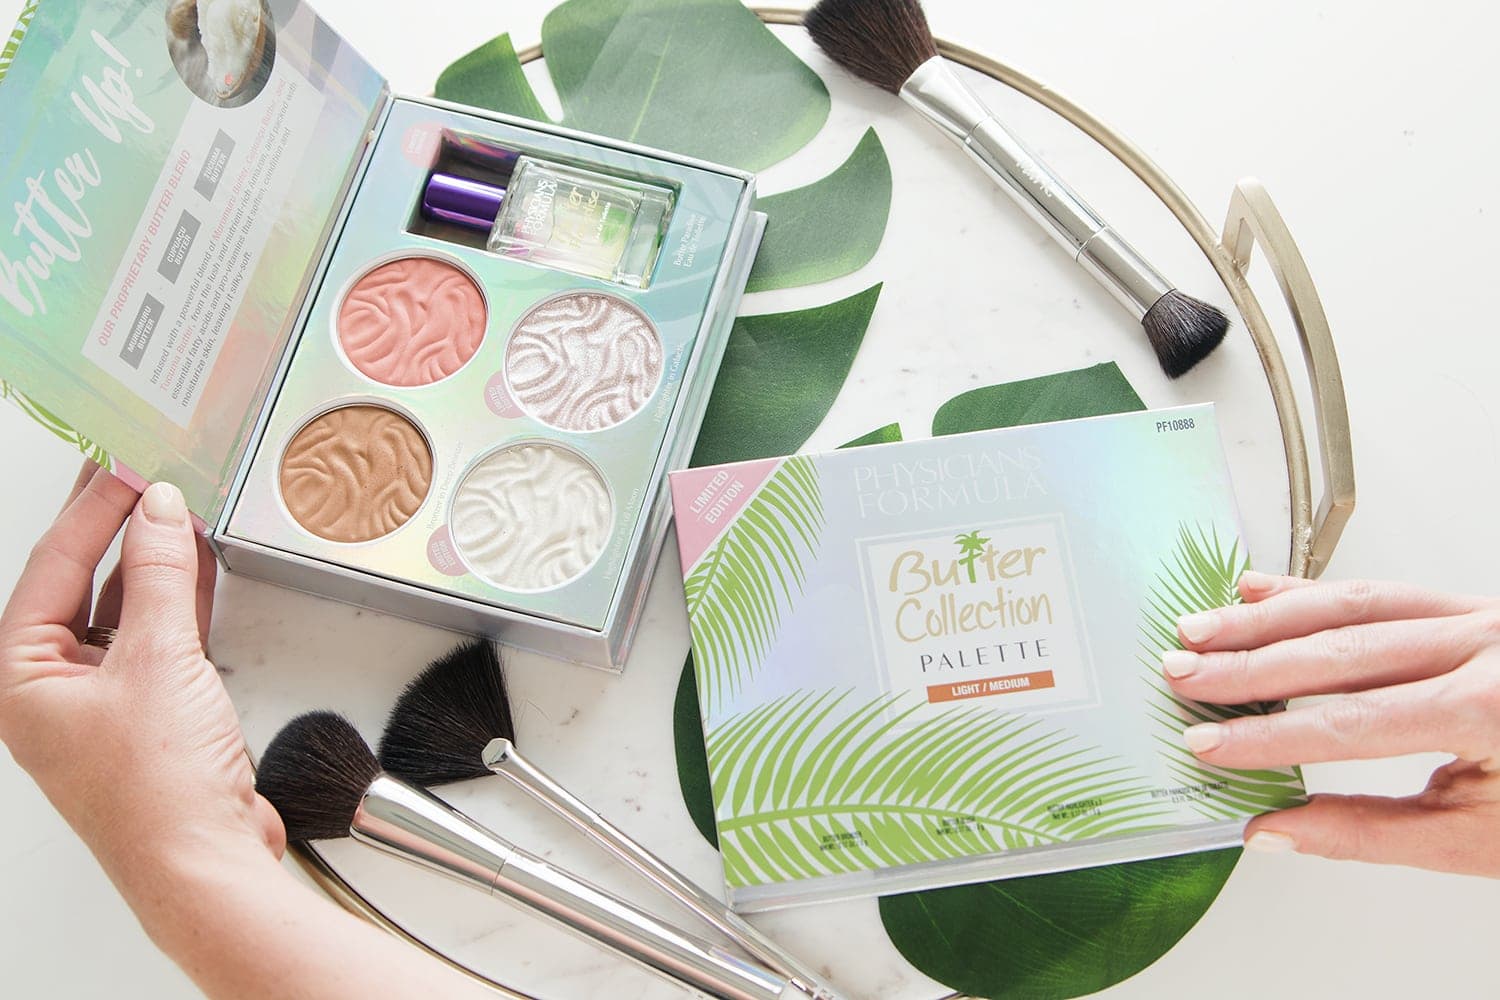 Houston beauty blogger Meg O. on the Go shares about the Physicians Formula Butter Collection palette